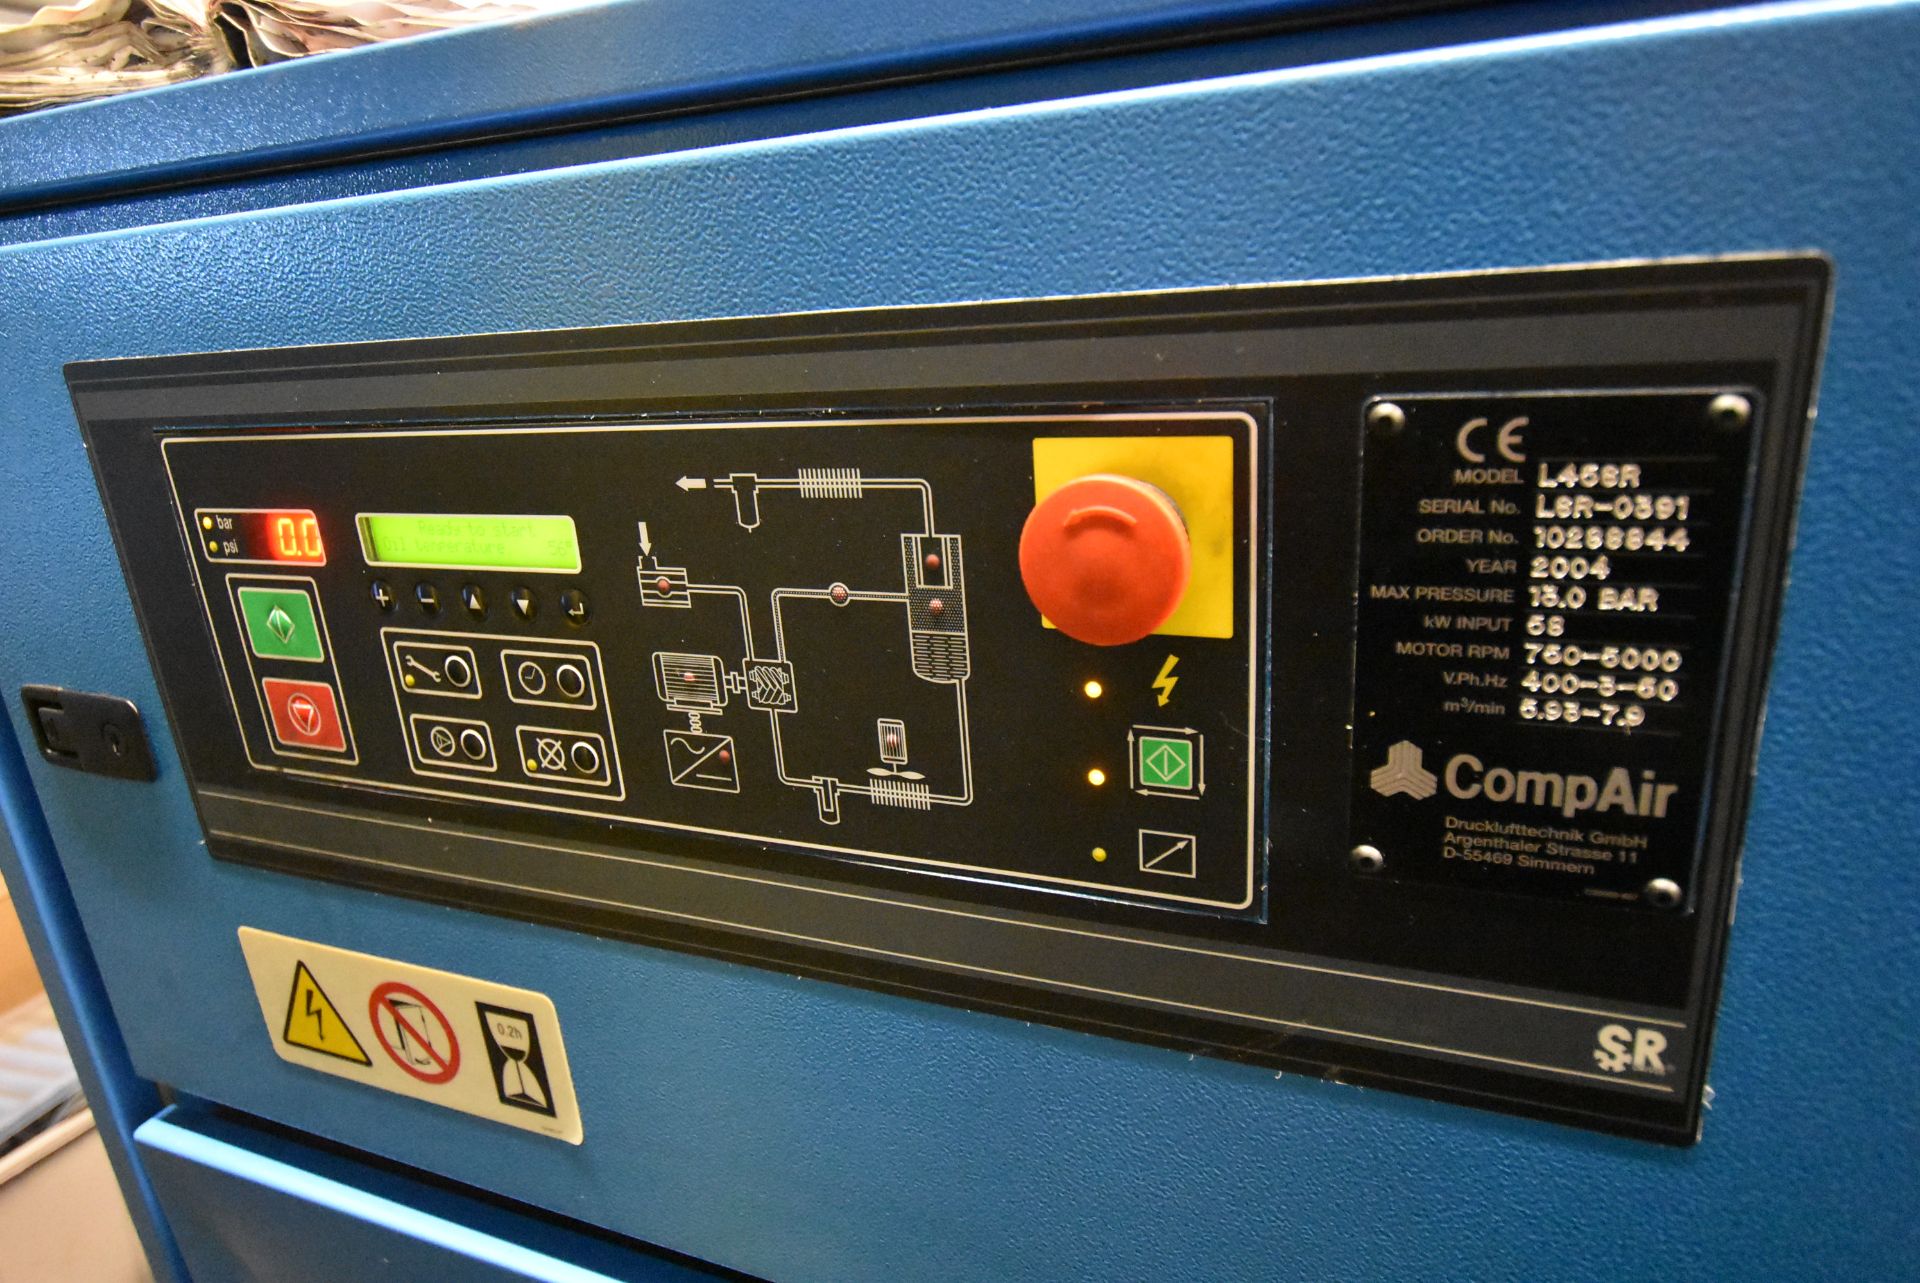 CompAir L45SR PACKAGED AIR COMPRESSOR, serial no. LSR-0391, year of manufacture 2004, 13.0 bar - Image 2 of 5